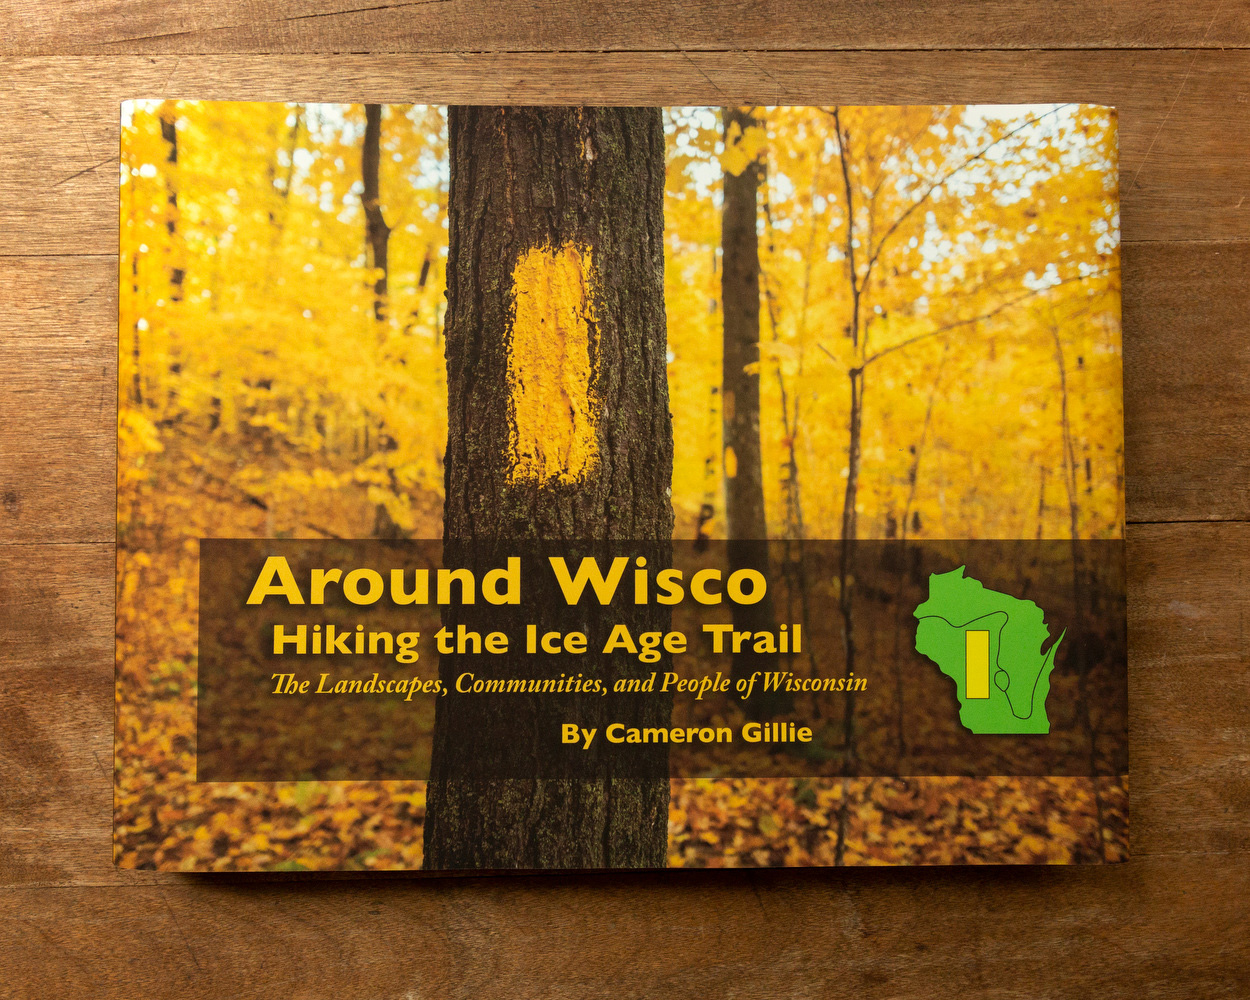 What to know about hiking on the Wisconsin Ice Age Trail